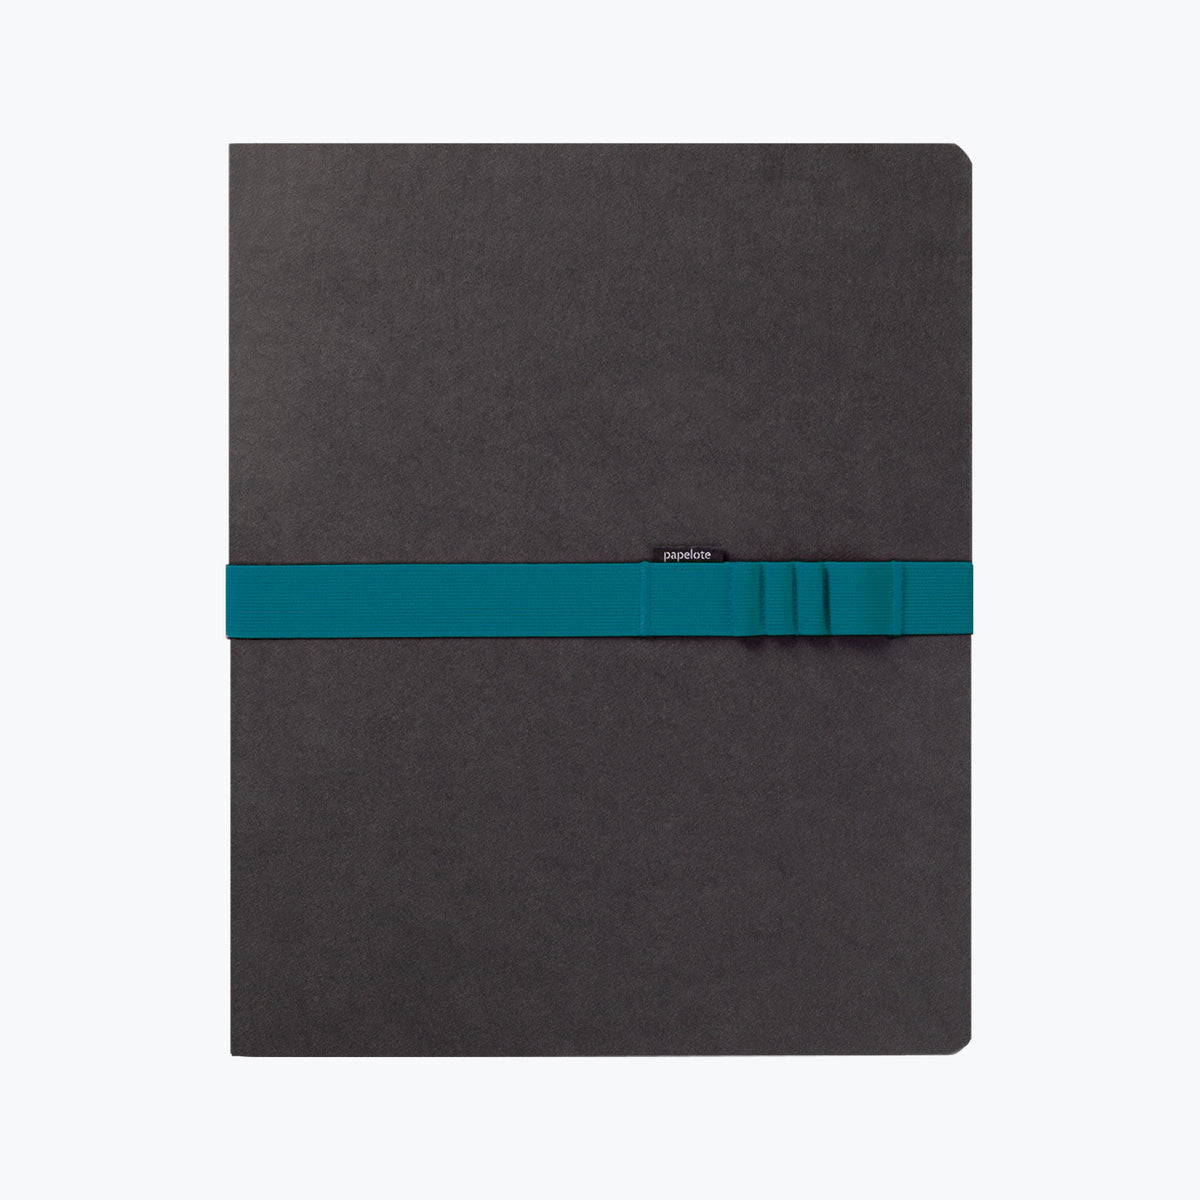 Papelote - Folder Box - A4 - Turquoise